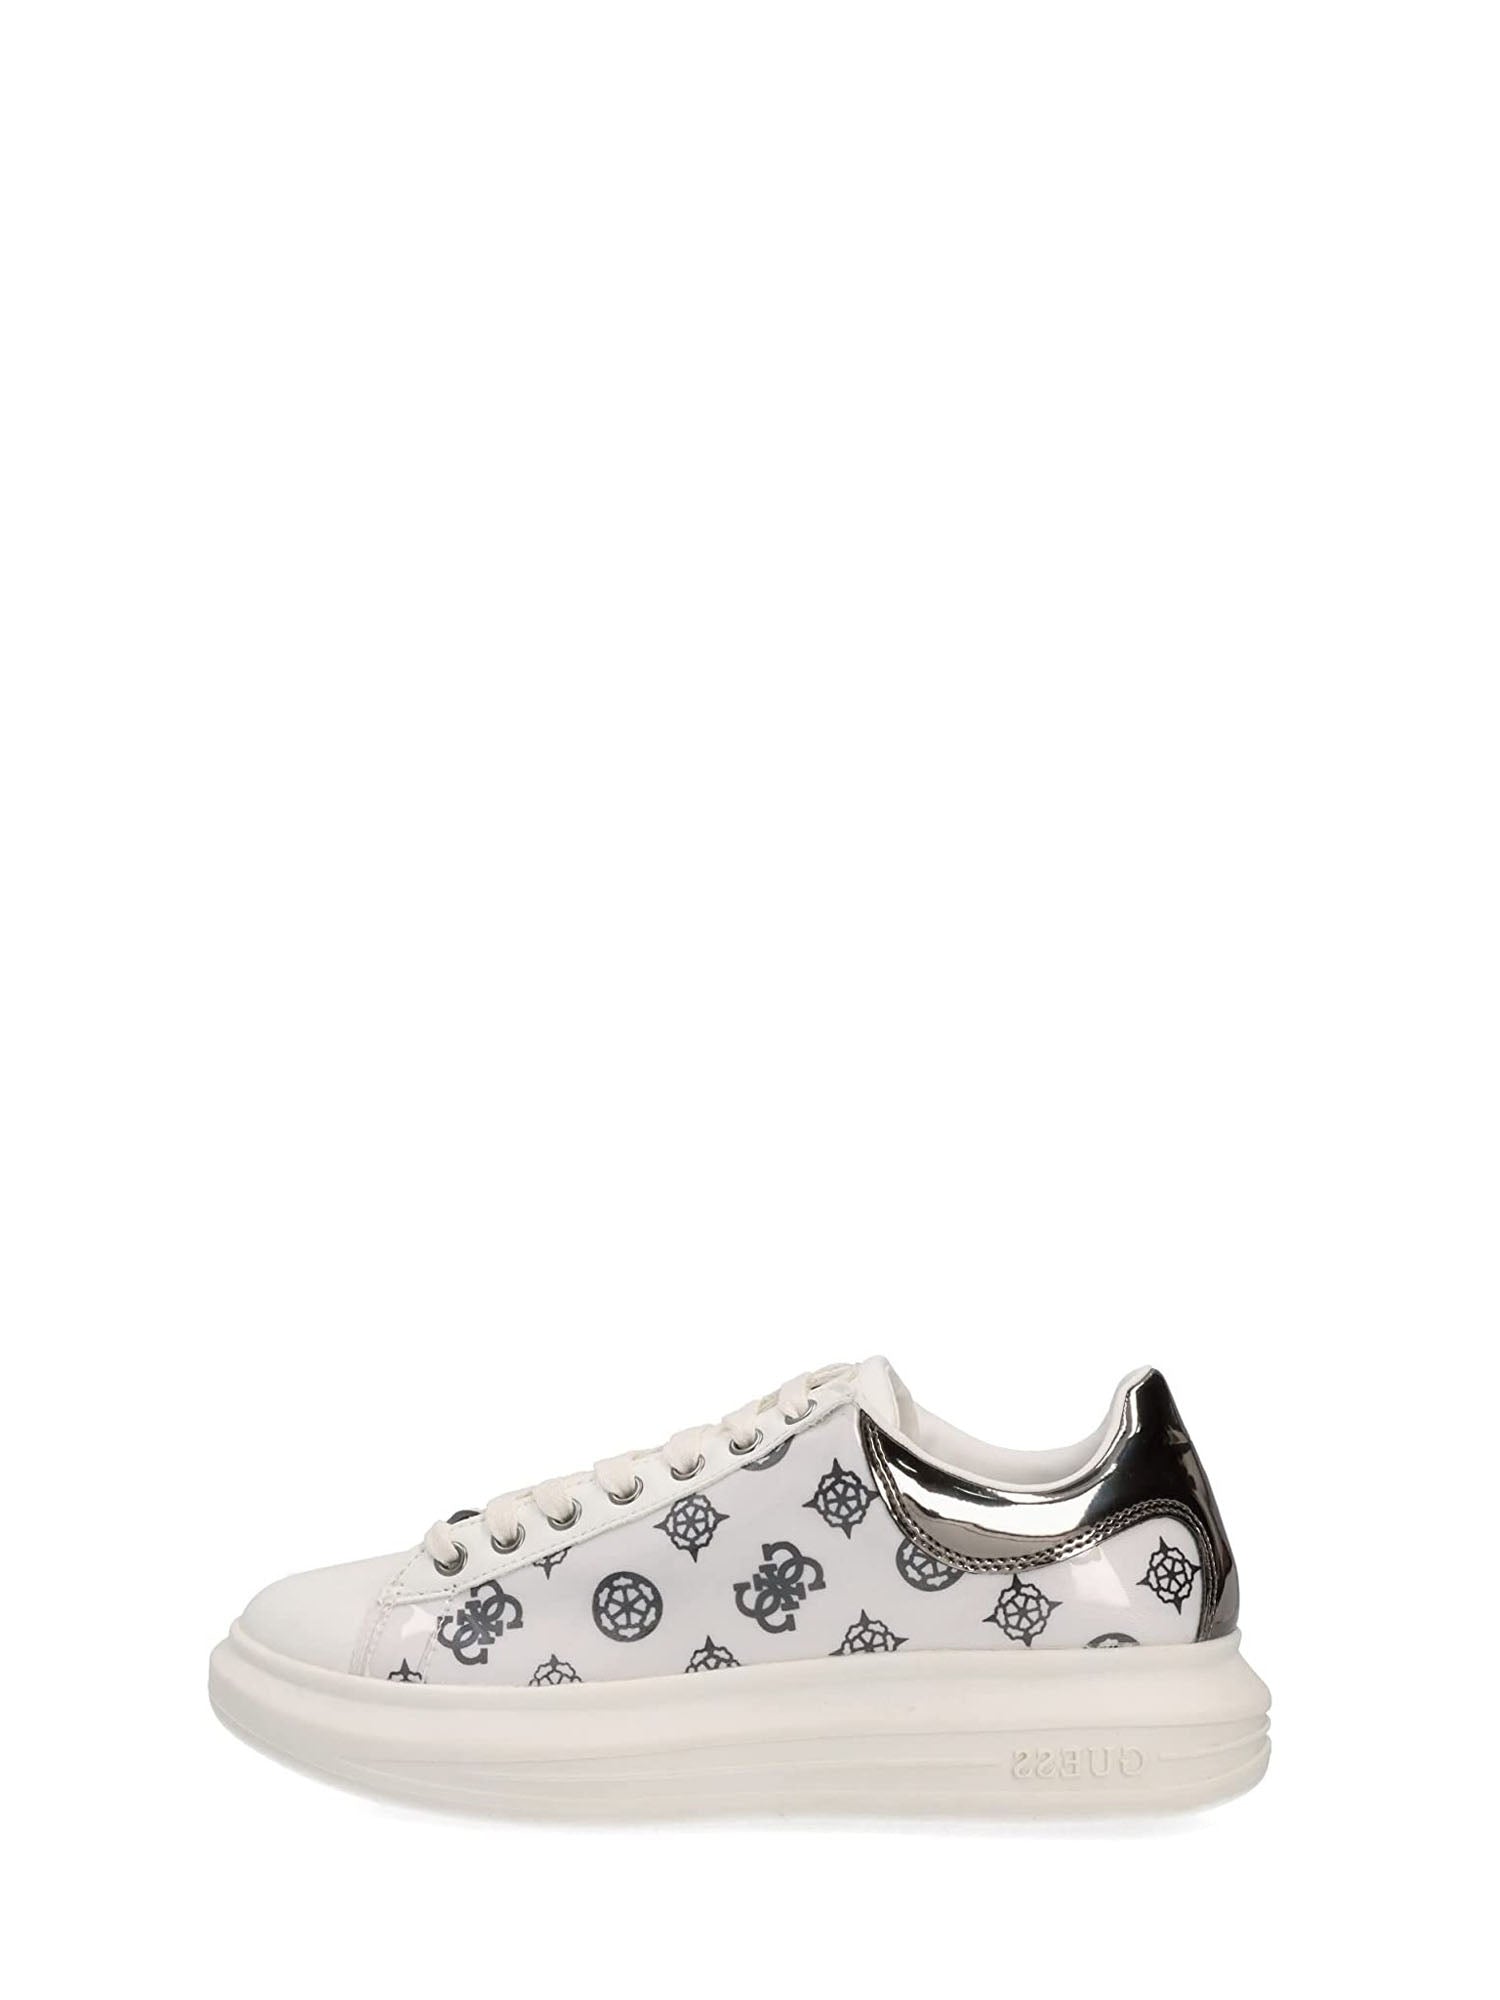 GUESS JEANS SNEAKERS VIBO BIANCO-ARGENTO